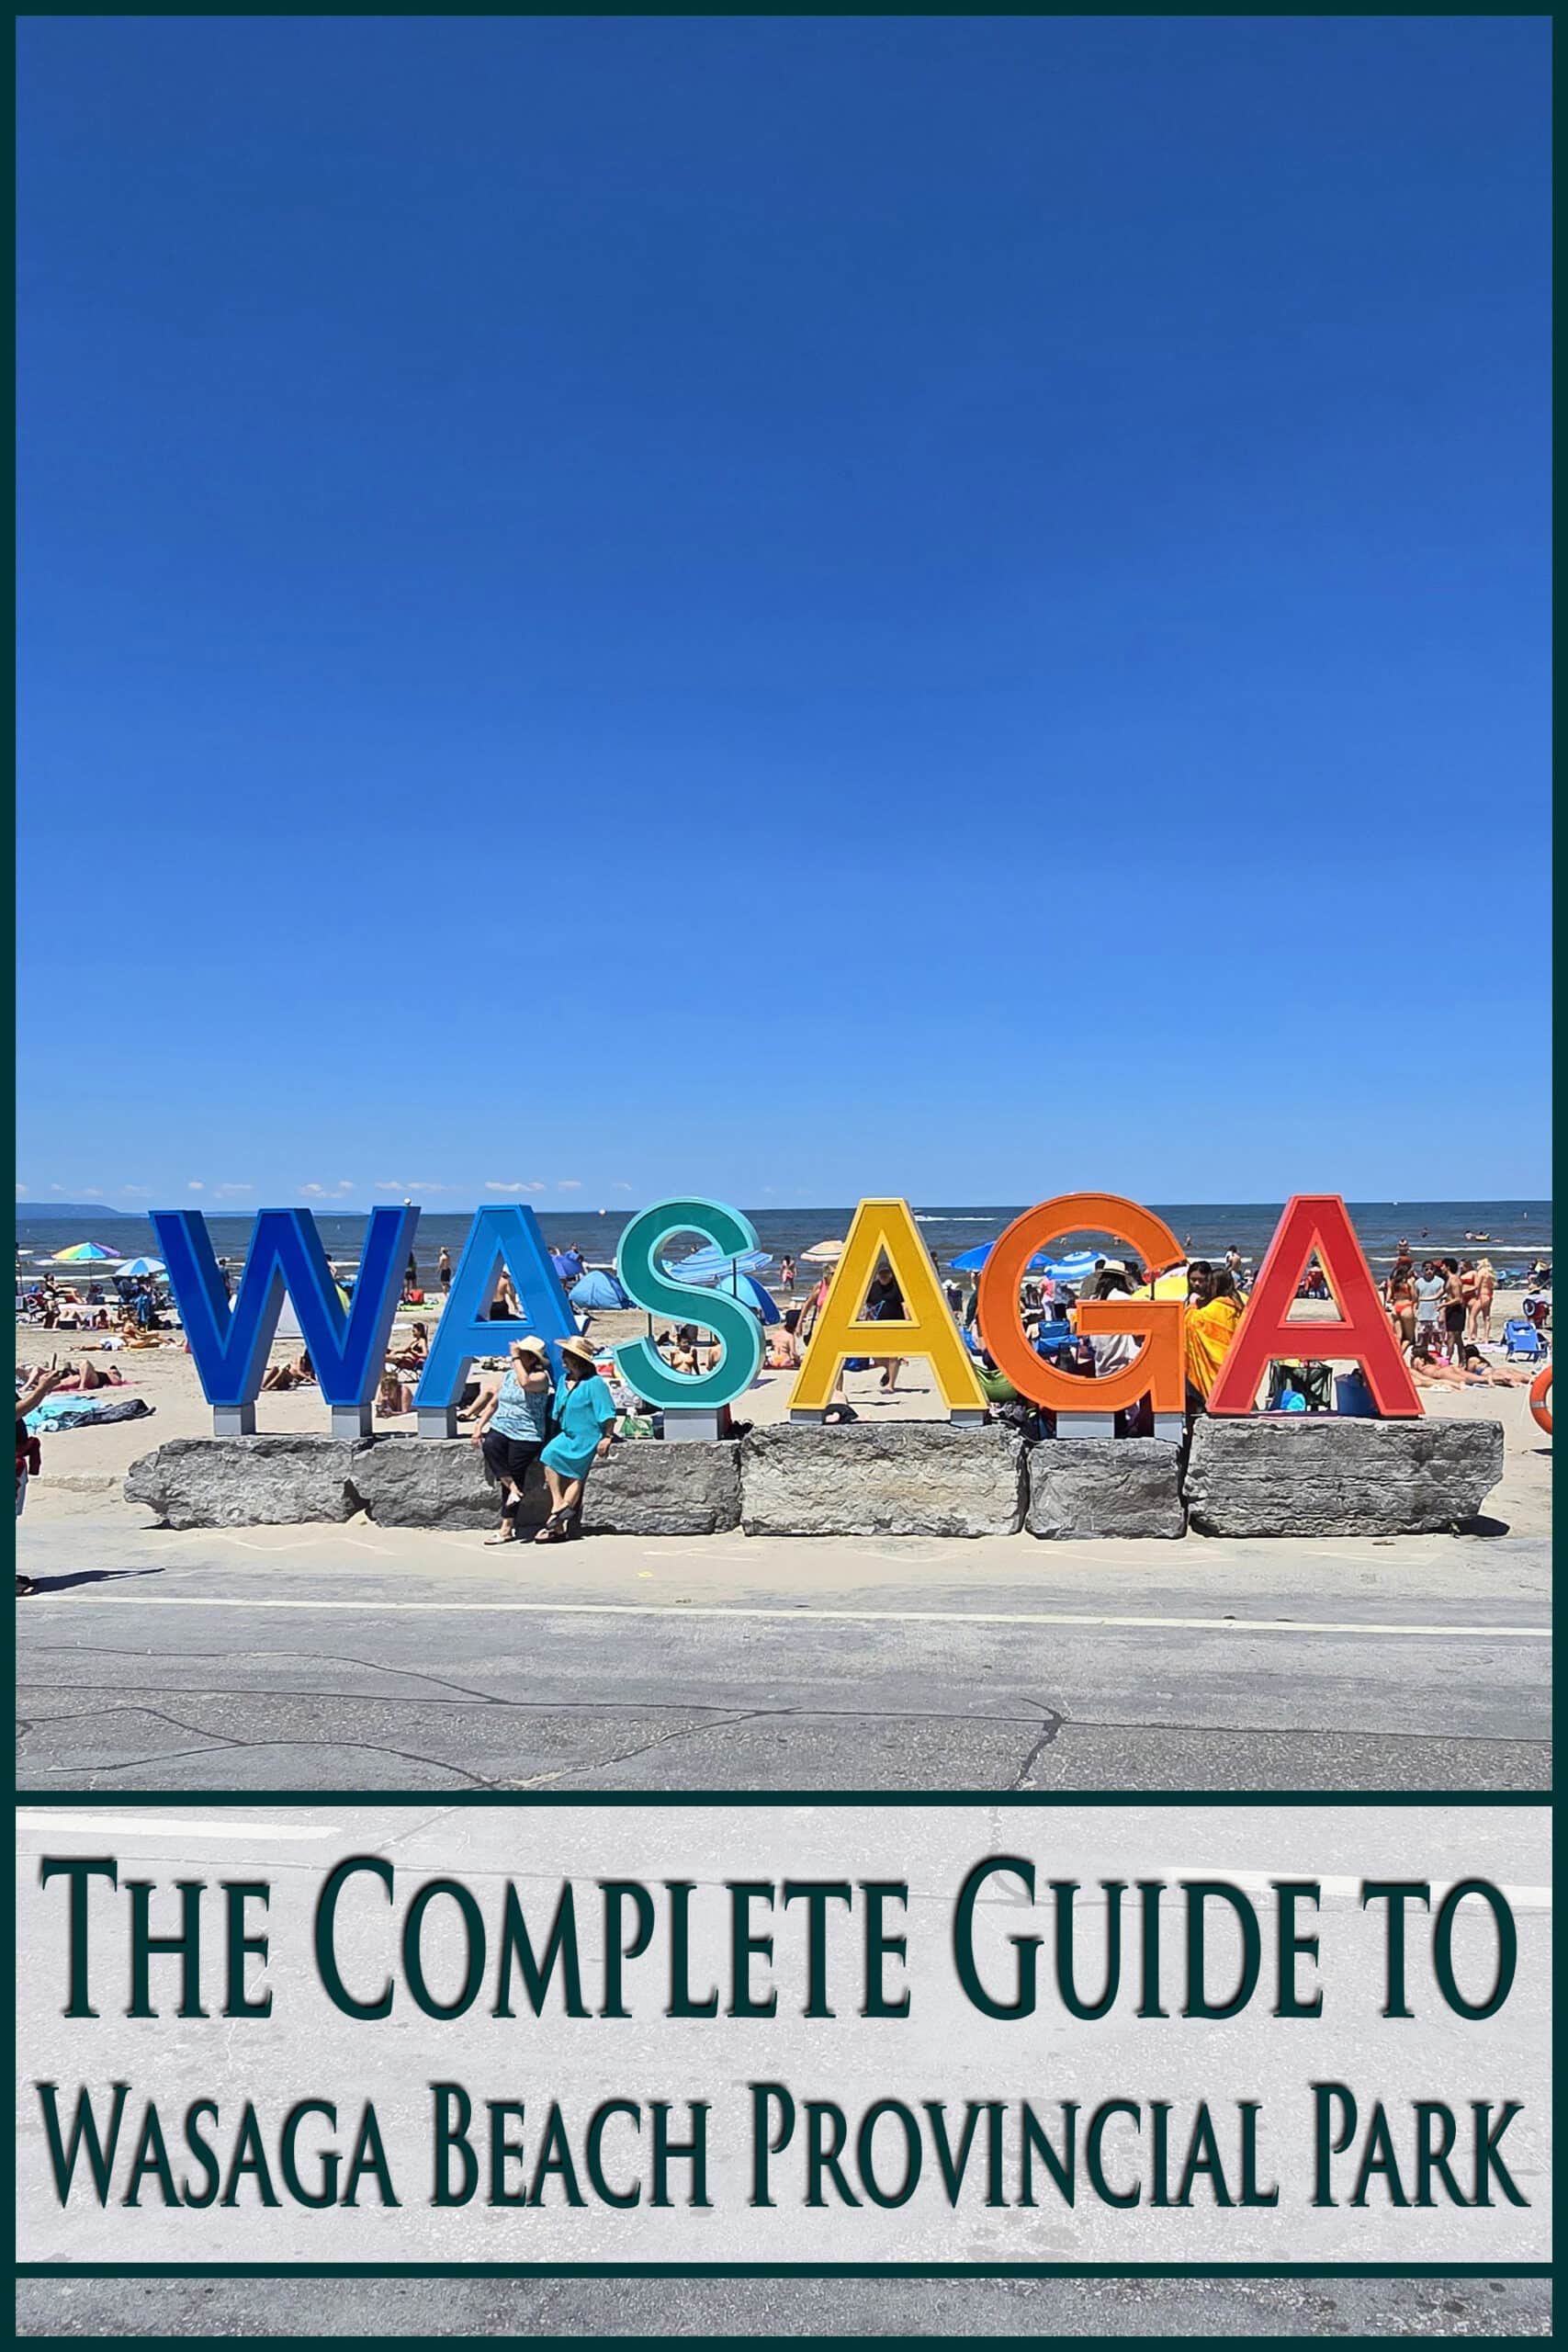 Rainbow letters spelling out wasaga, with loads of people behind it. Overlaid text says the complete guide to wasaga beach provincial park.